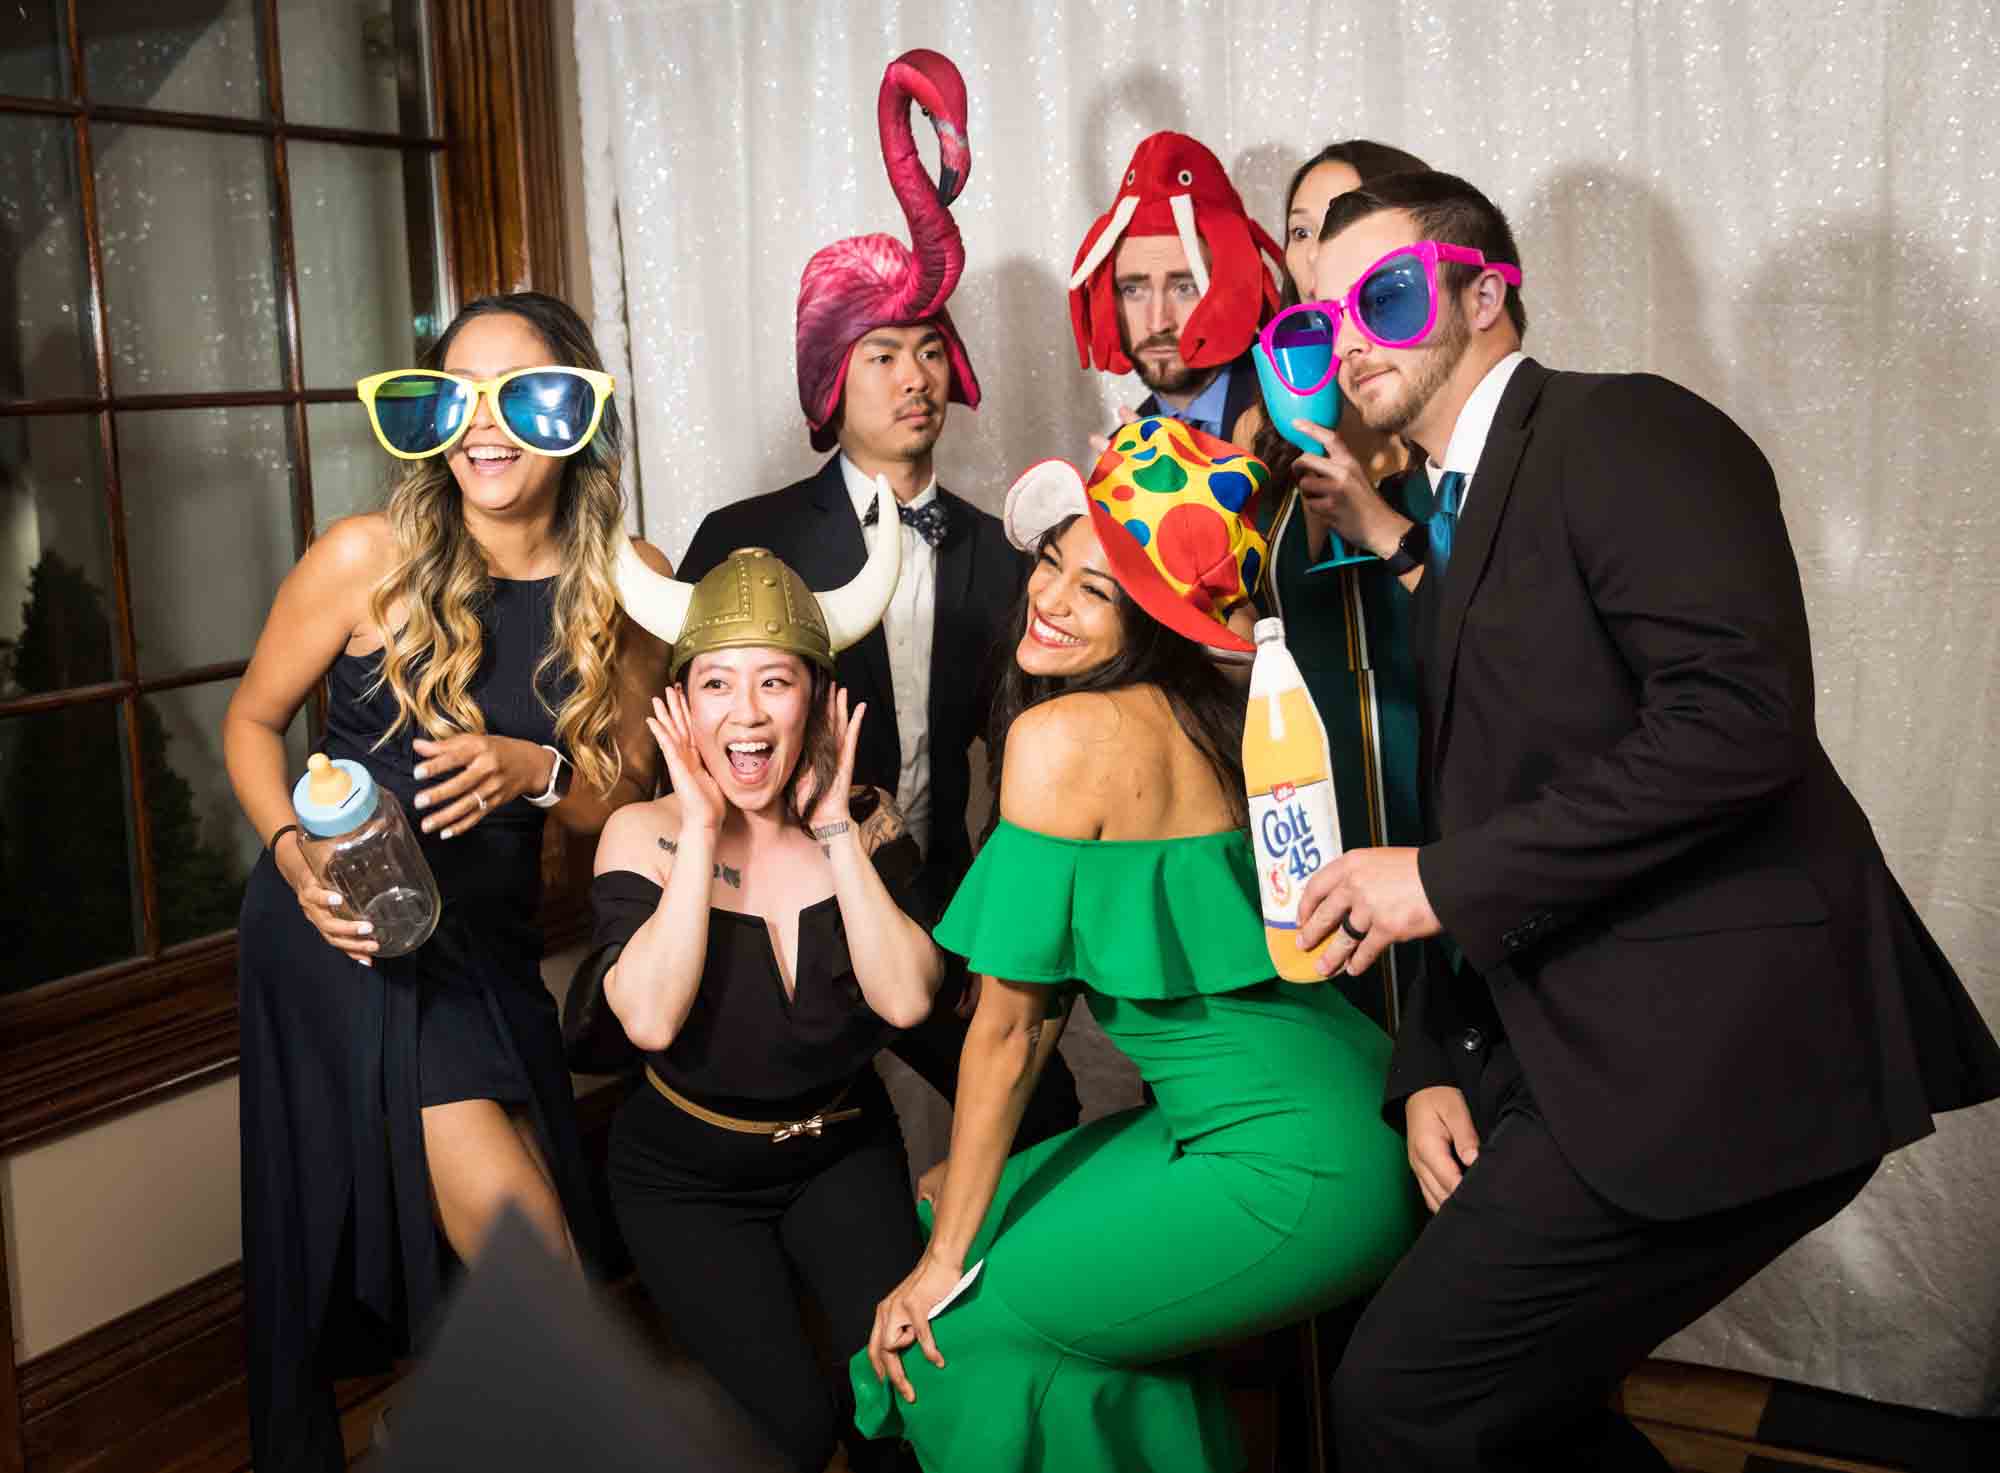 Guests dressed in funny hats at a photo booth for an article on how to find a San Antonio wedding photographer